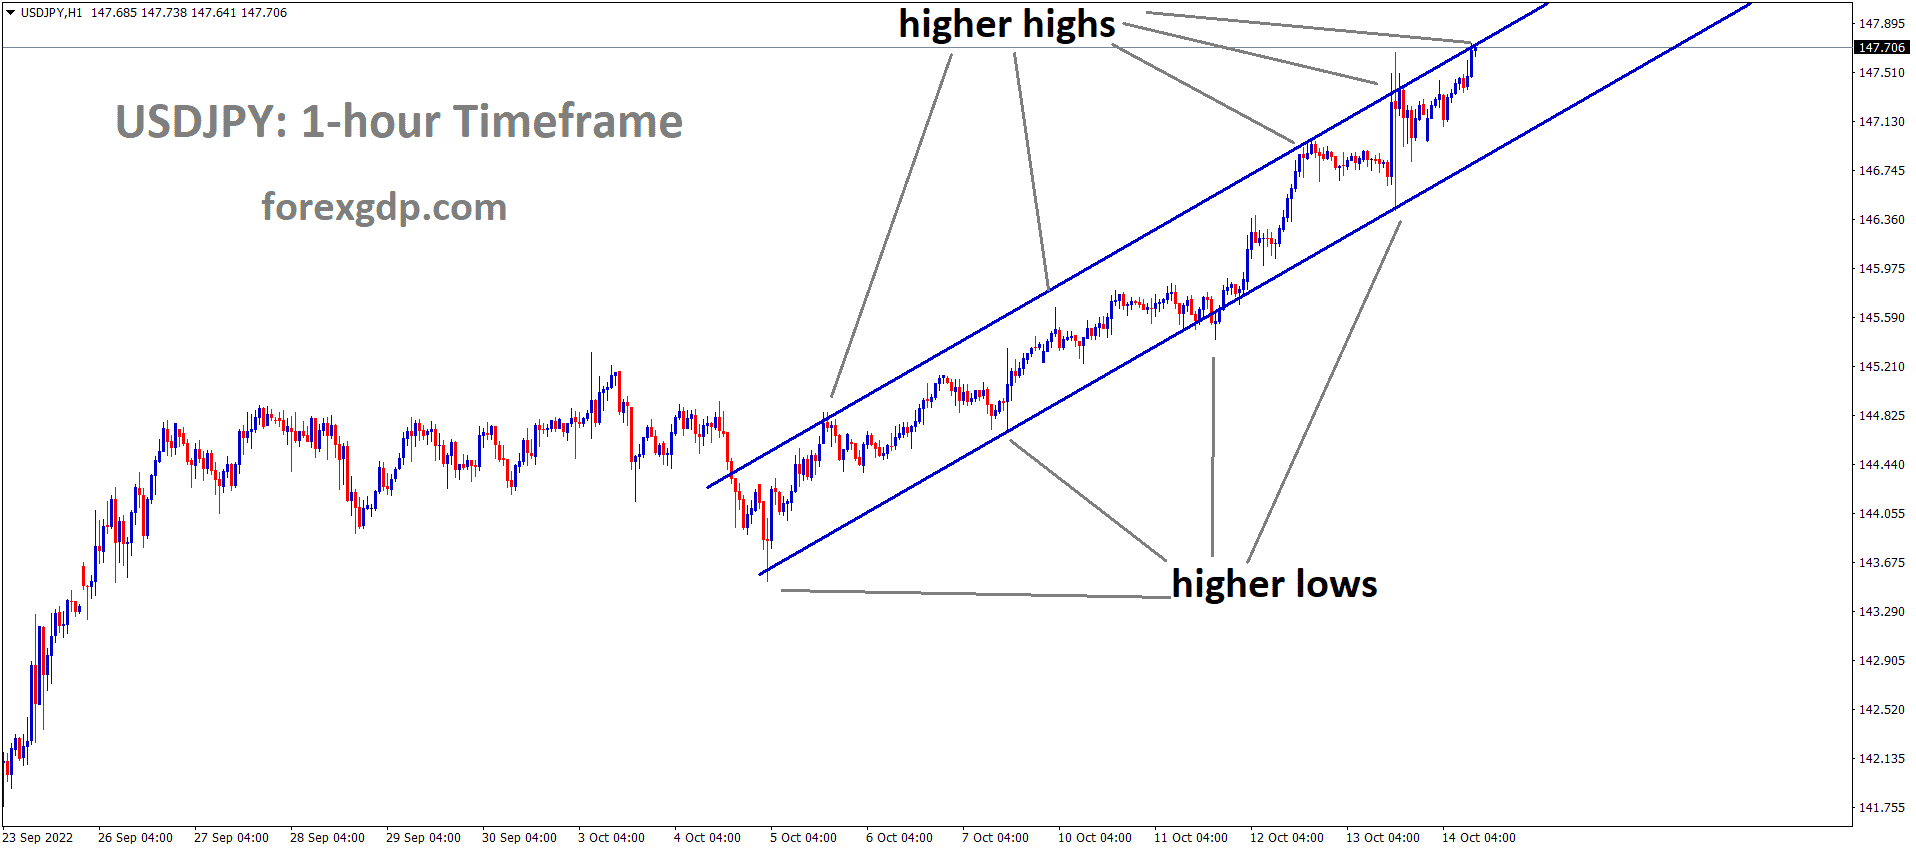 USDJPY is moving in an Ascending channel and the market has reached the higher high area of the pattern